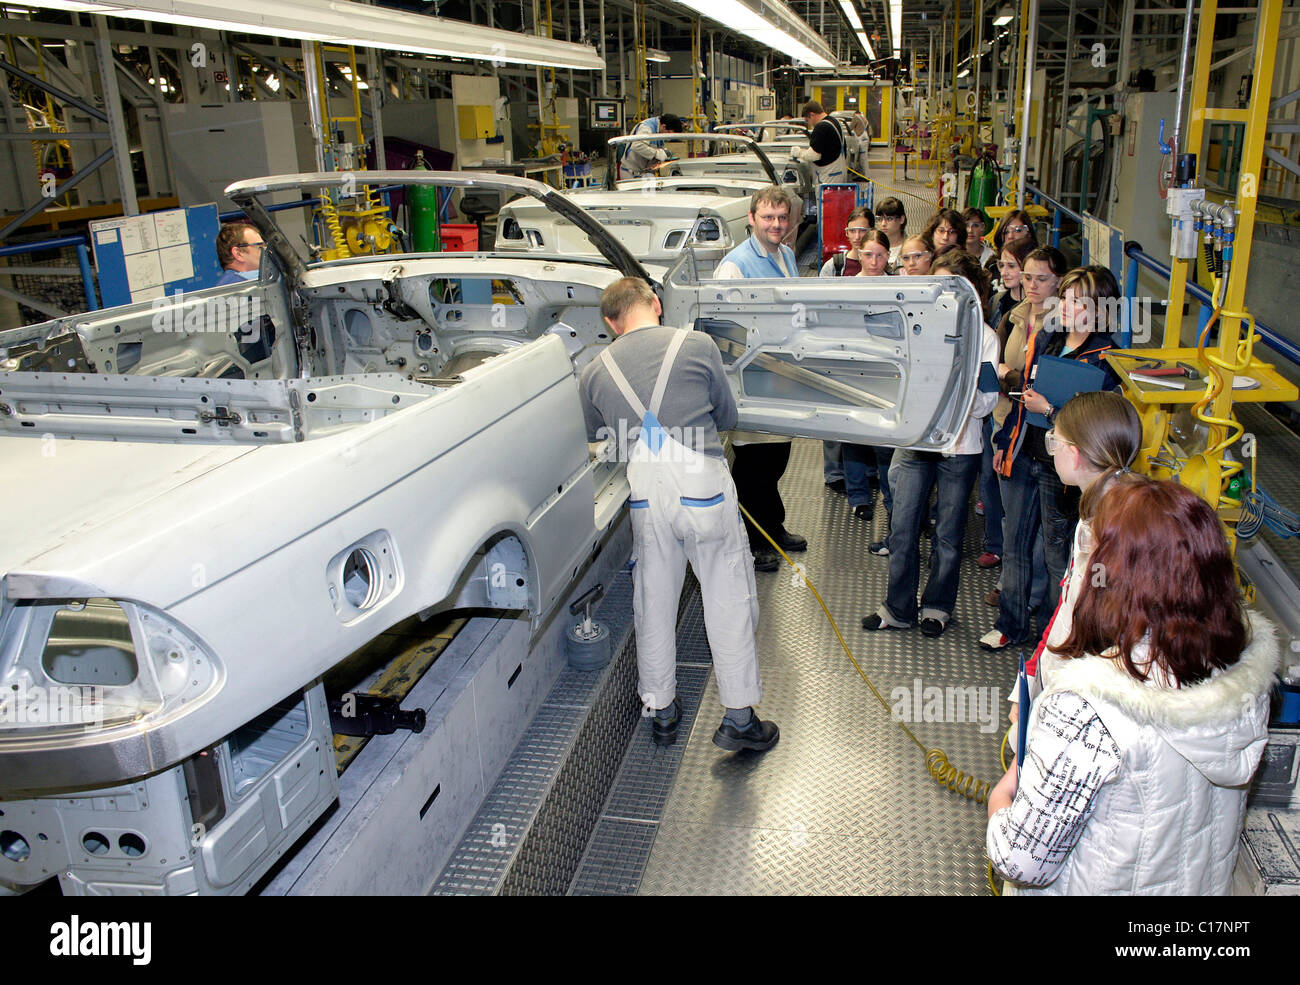 Girls students during the Girl's Day on April 27, 2006 observing chassis production of a Cabriolet at the BMW AG production Stock Photo